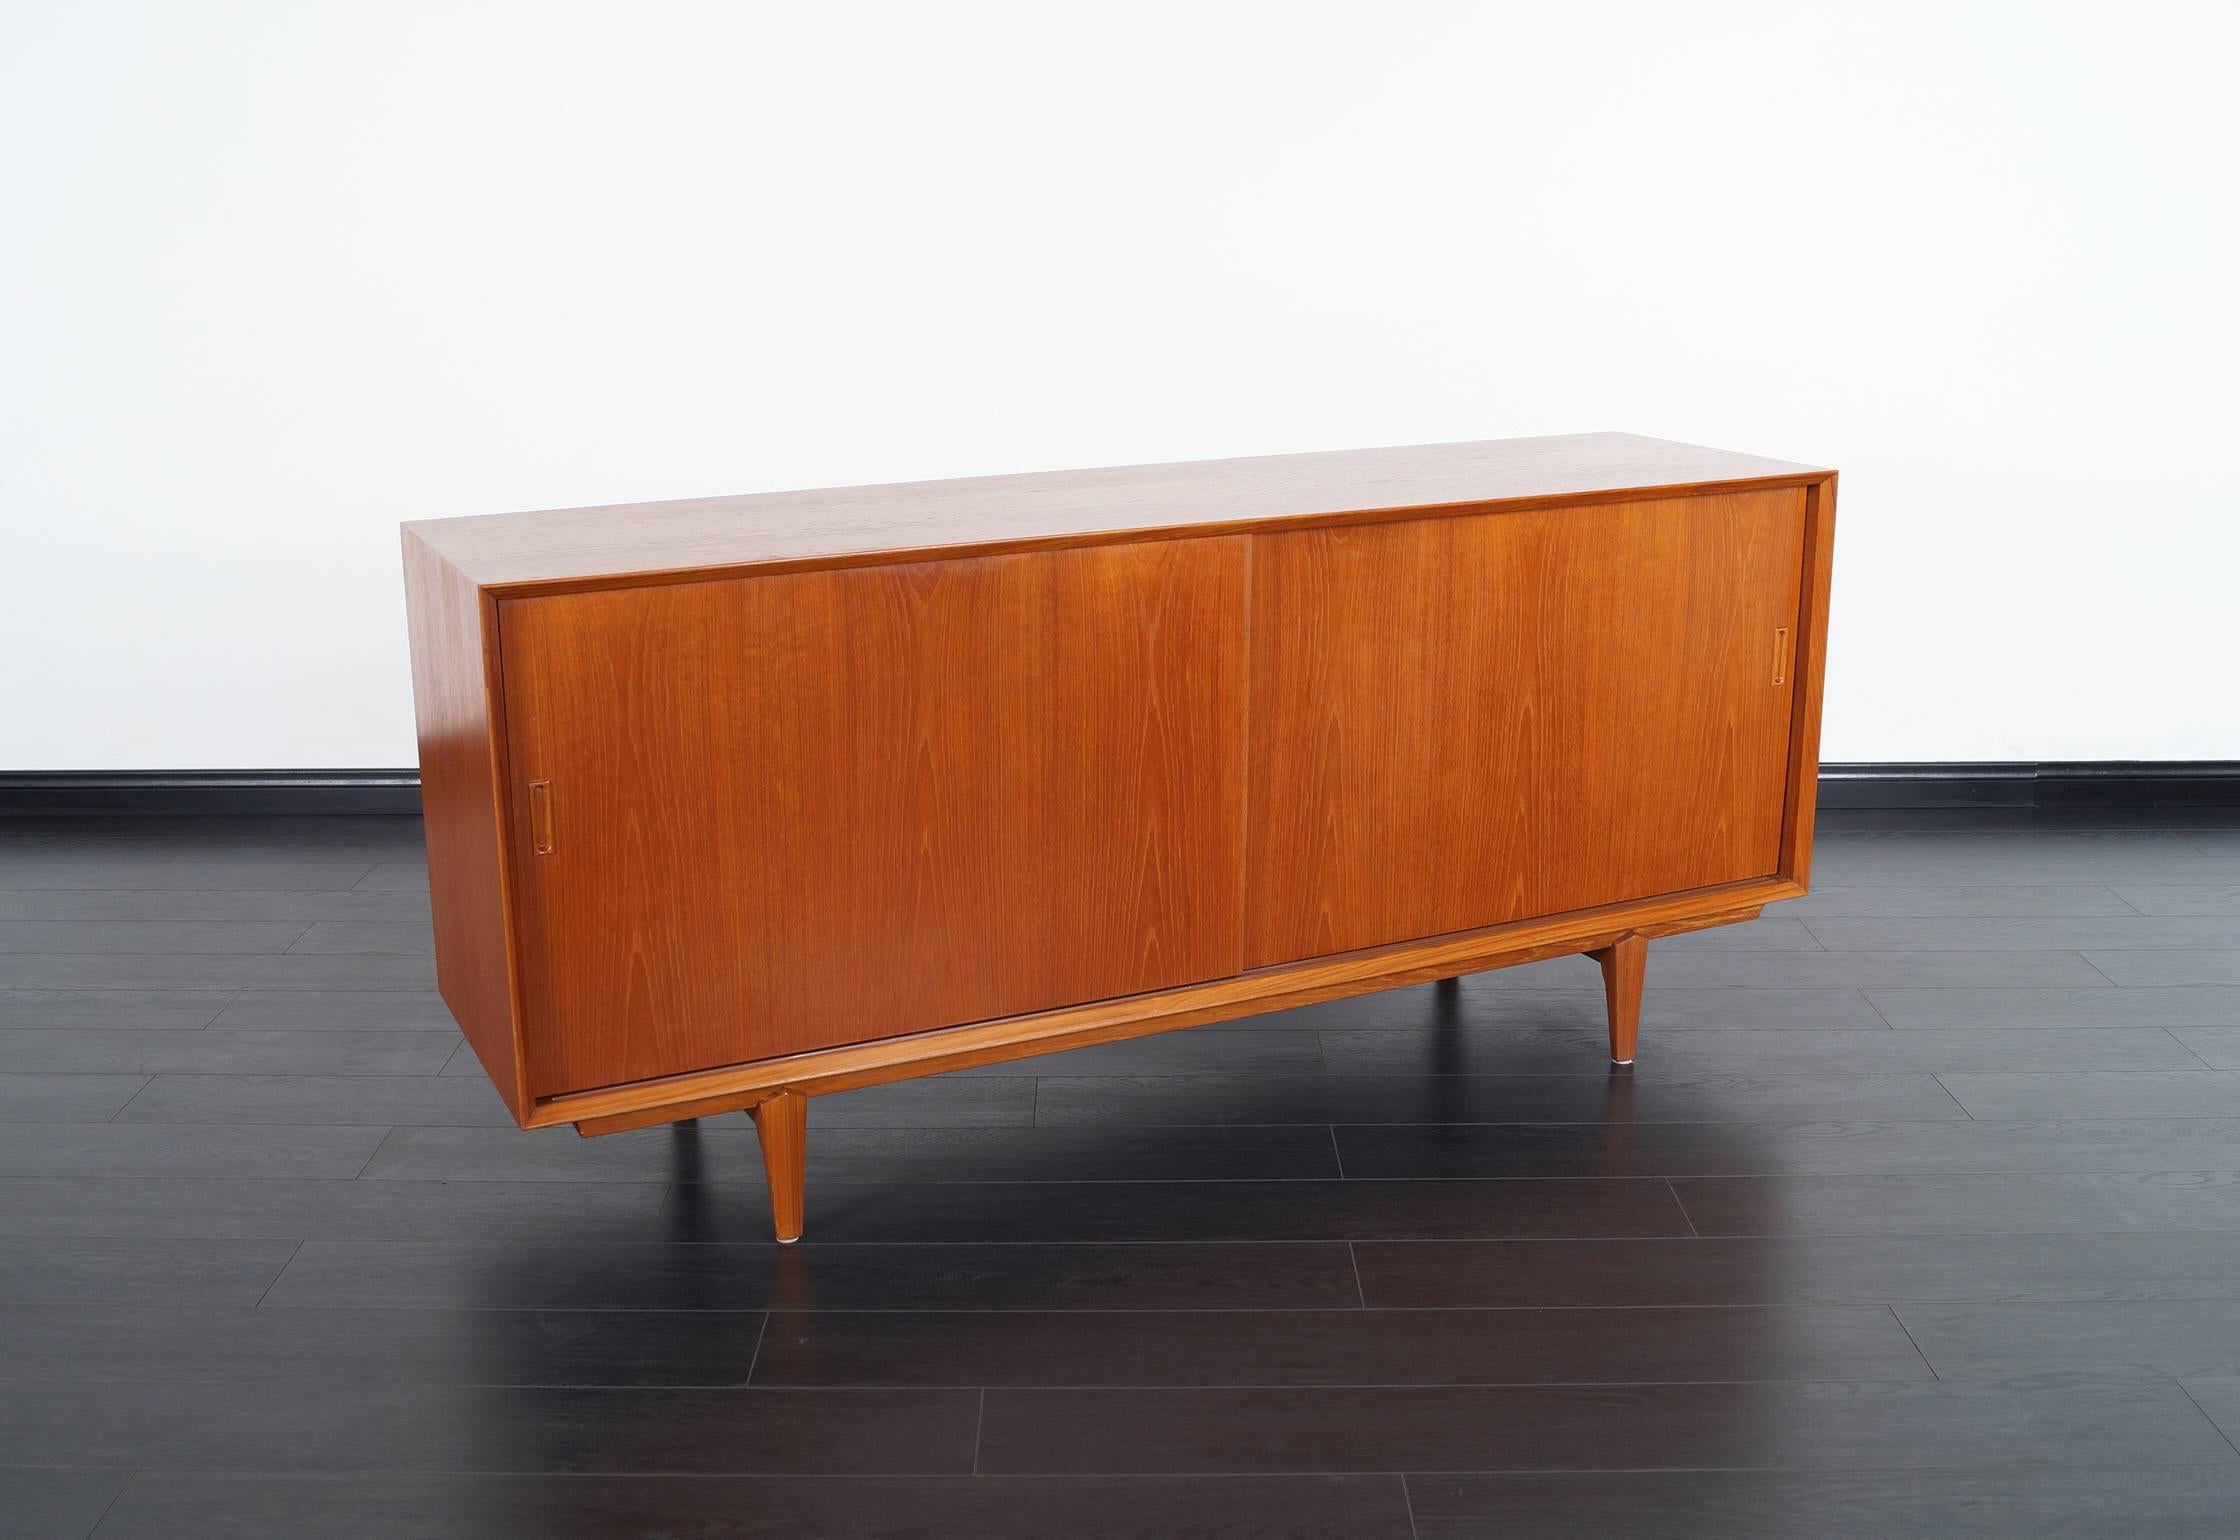 Danish modern teak sideboard features five pull-out drawers with an adjustable shelf on the left side, and one adjustable shelf to the right.